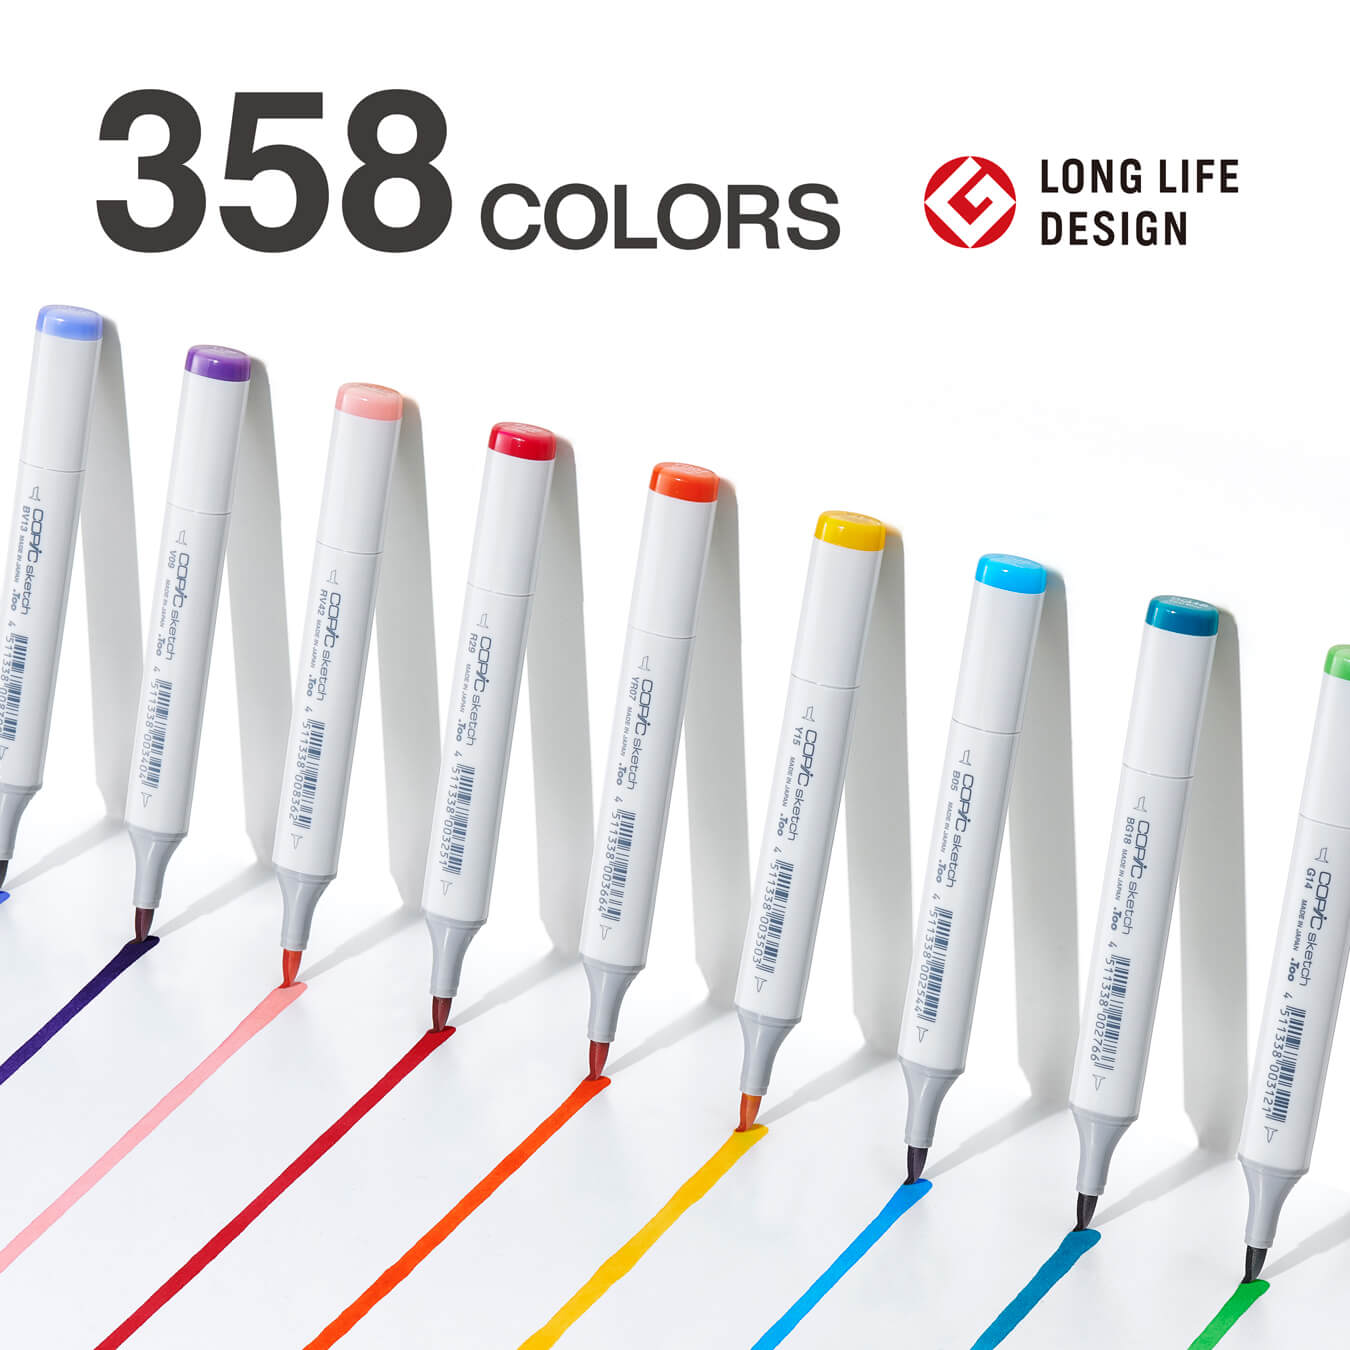 12 Best Art Markers Reviewed and Rated in 2023 - Art Ltd Magazine